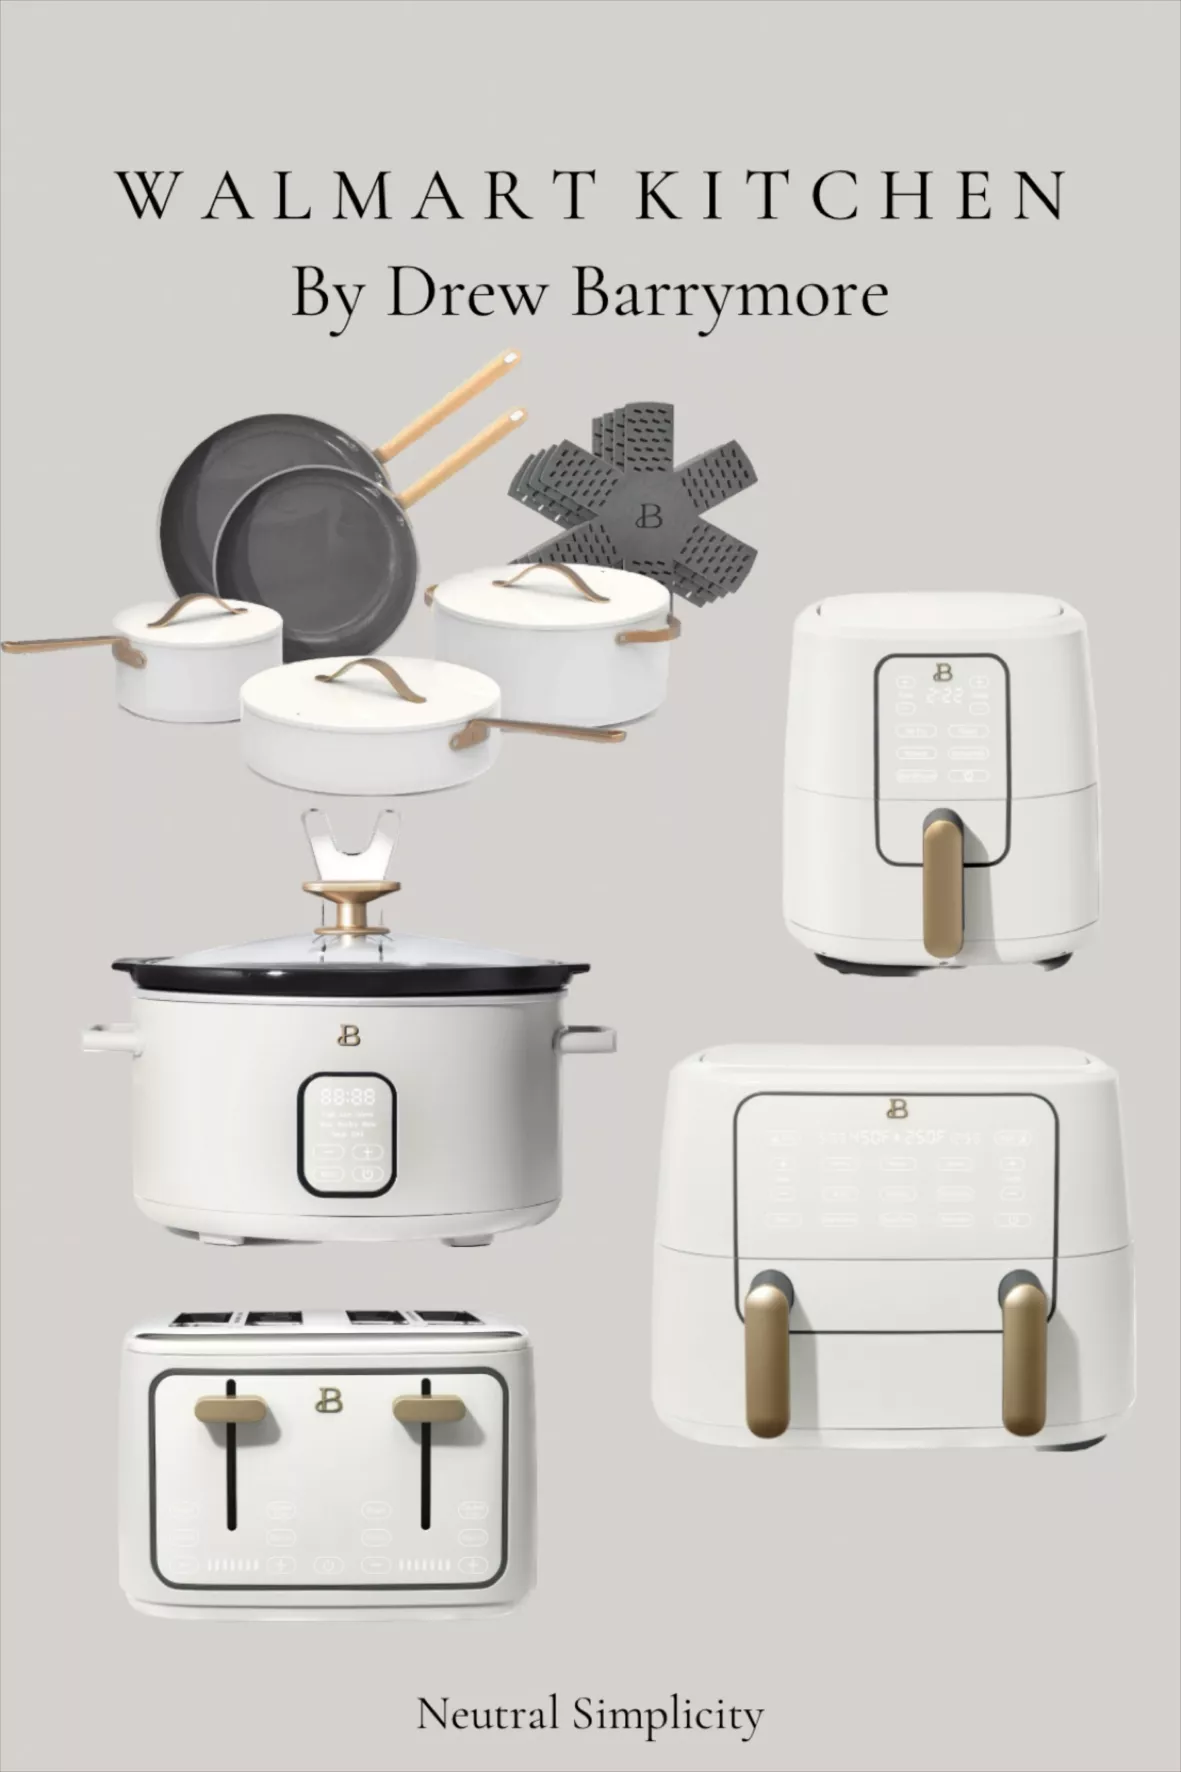 We're LOVING the Beautiful Kitchenware Line by Drew Barrymore!